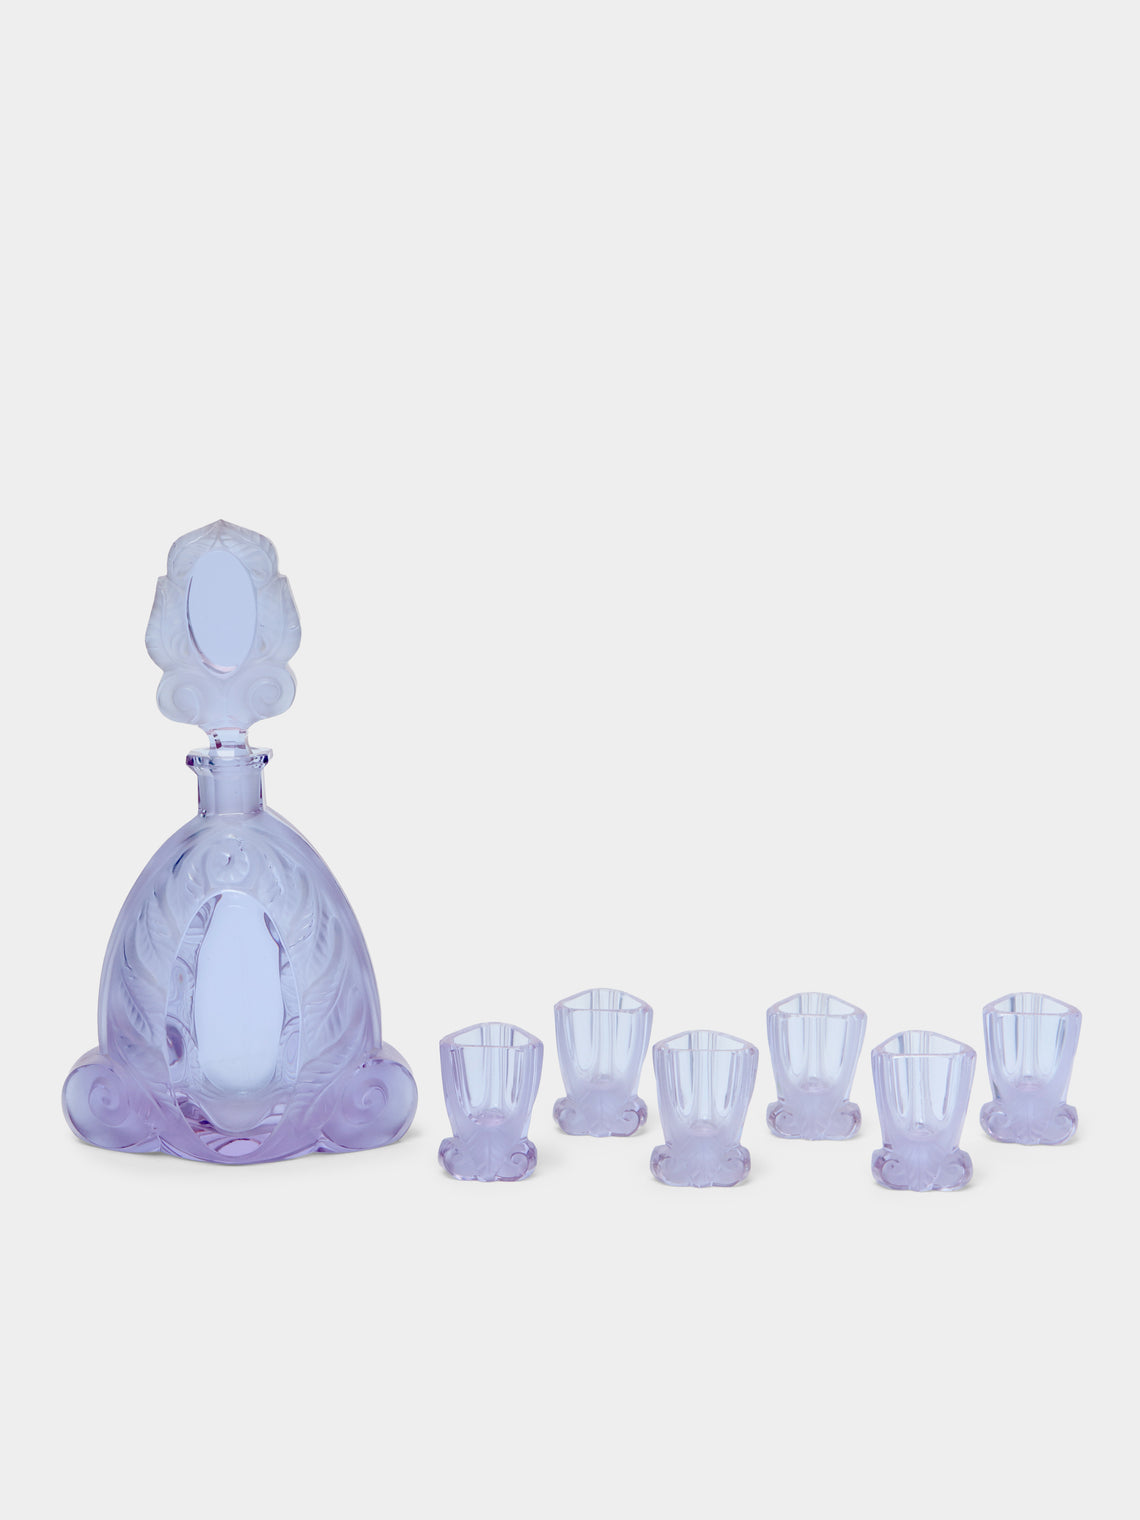 Antique and Vintage - 1930s Alexandrite Crystal Decanter with Shot Glasses (Set of 6) -  - ABASK - 